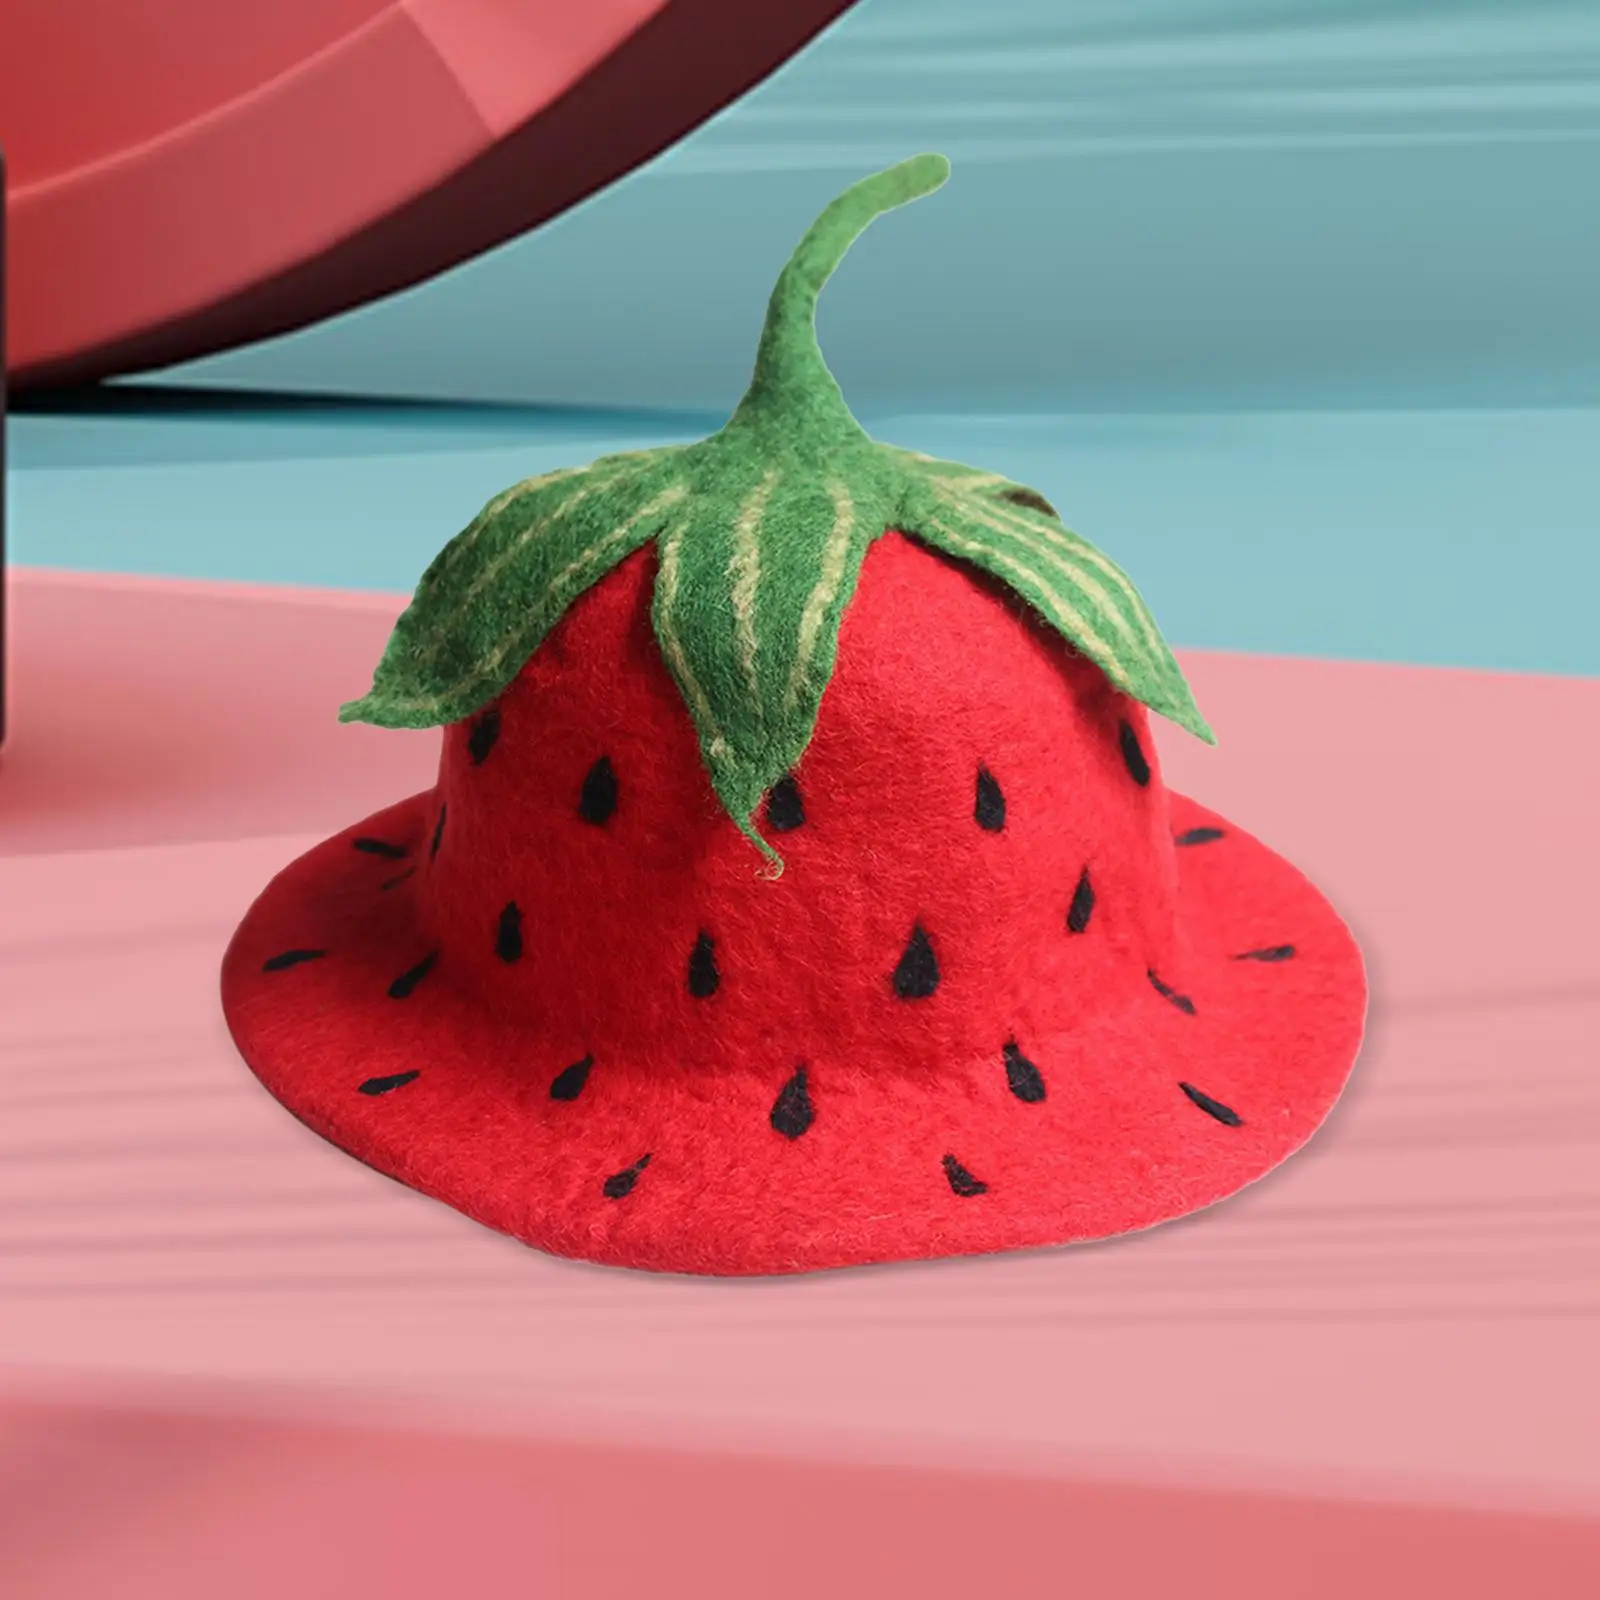 Strawberry Hat Dress up Warm Leisure Fashionable Girls Festival Party Unique Winter Headwear Adult Casual Comfortable Bucket Hat